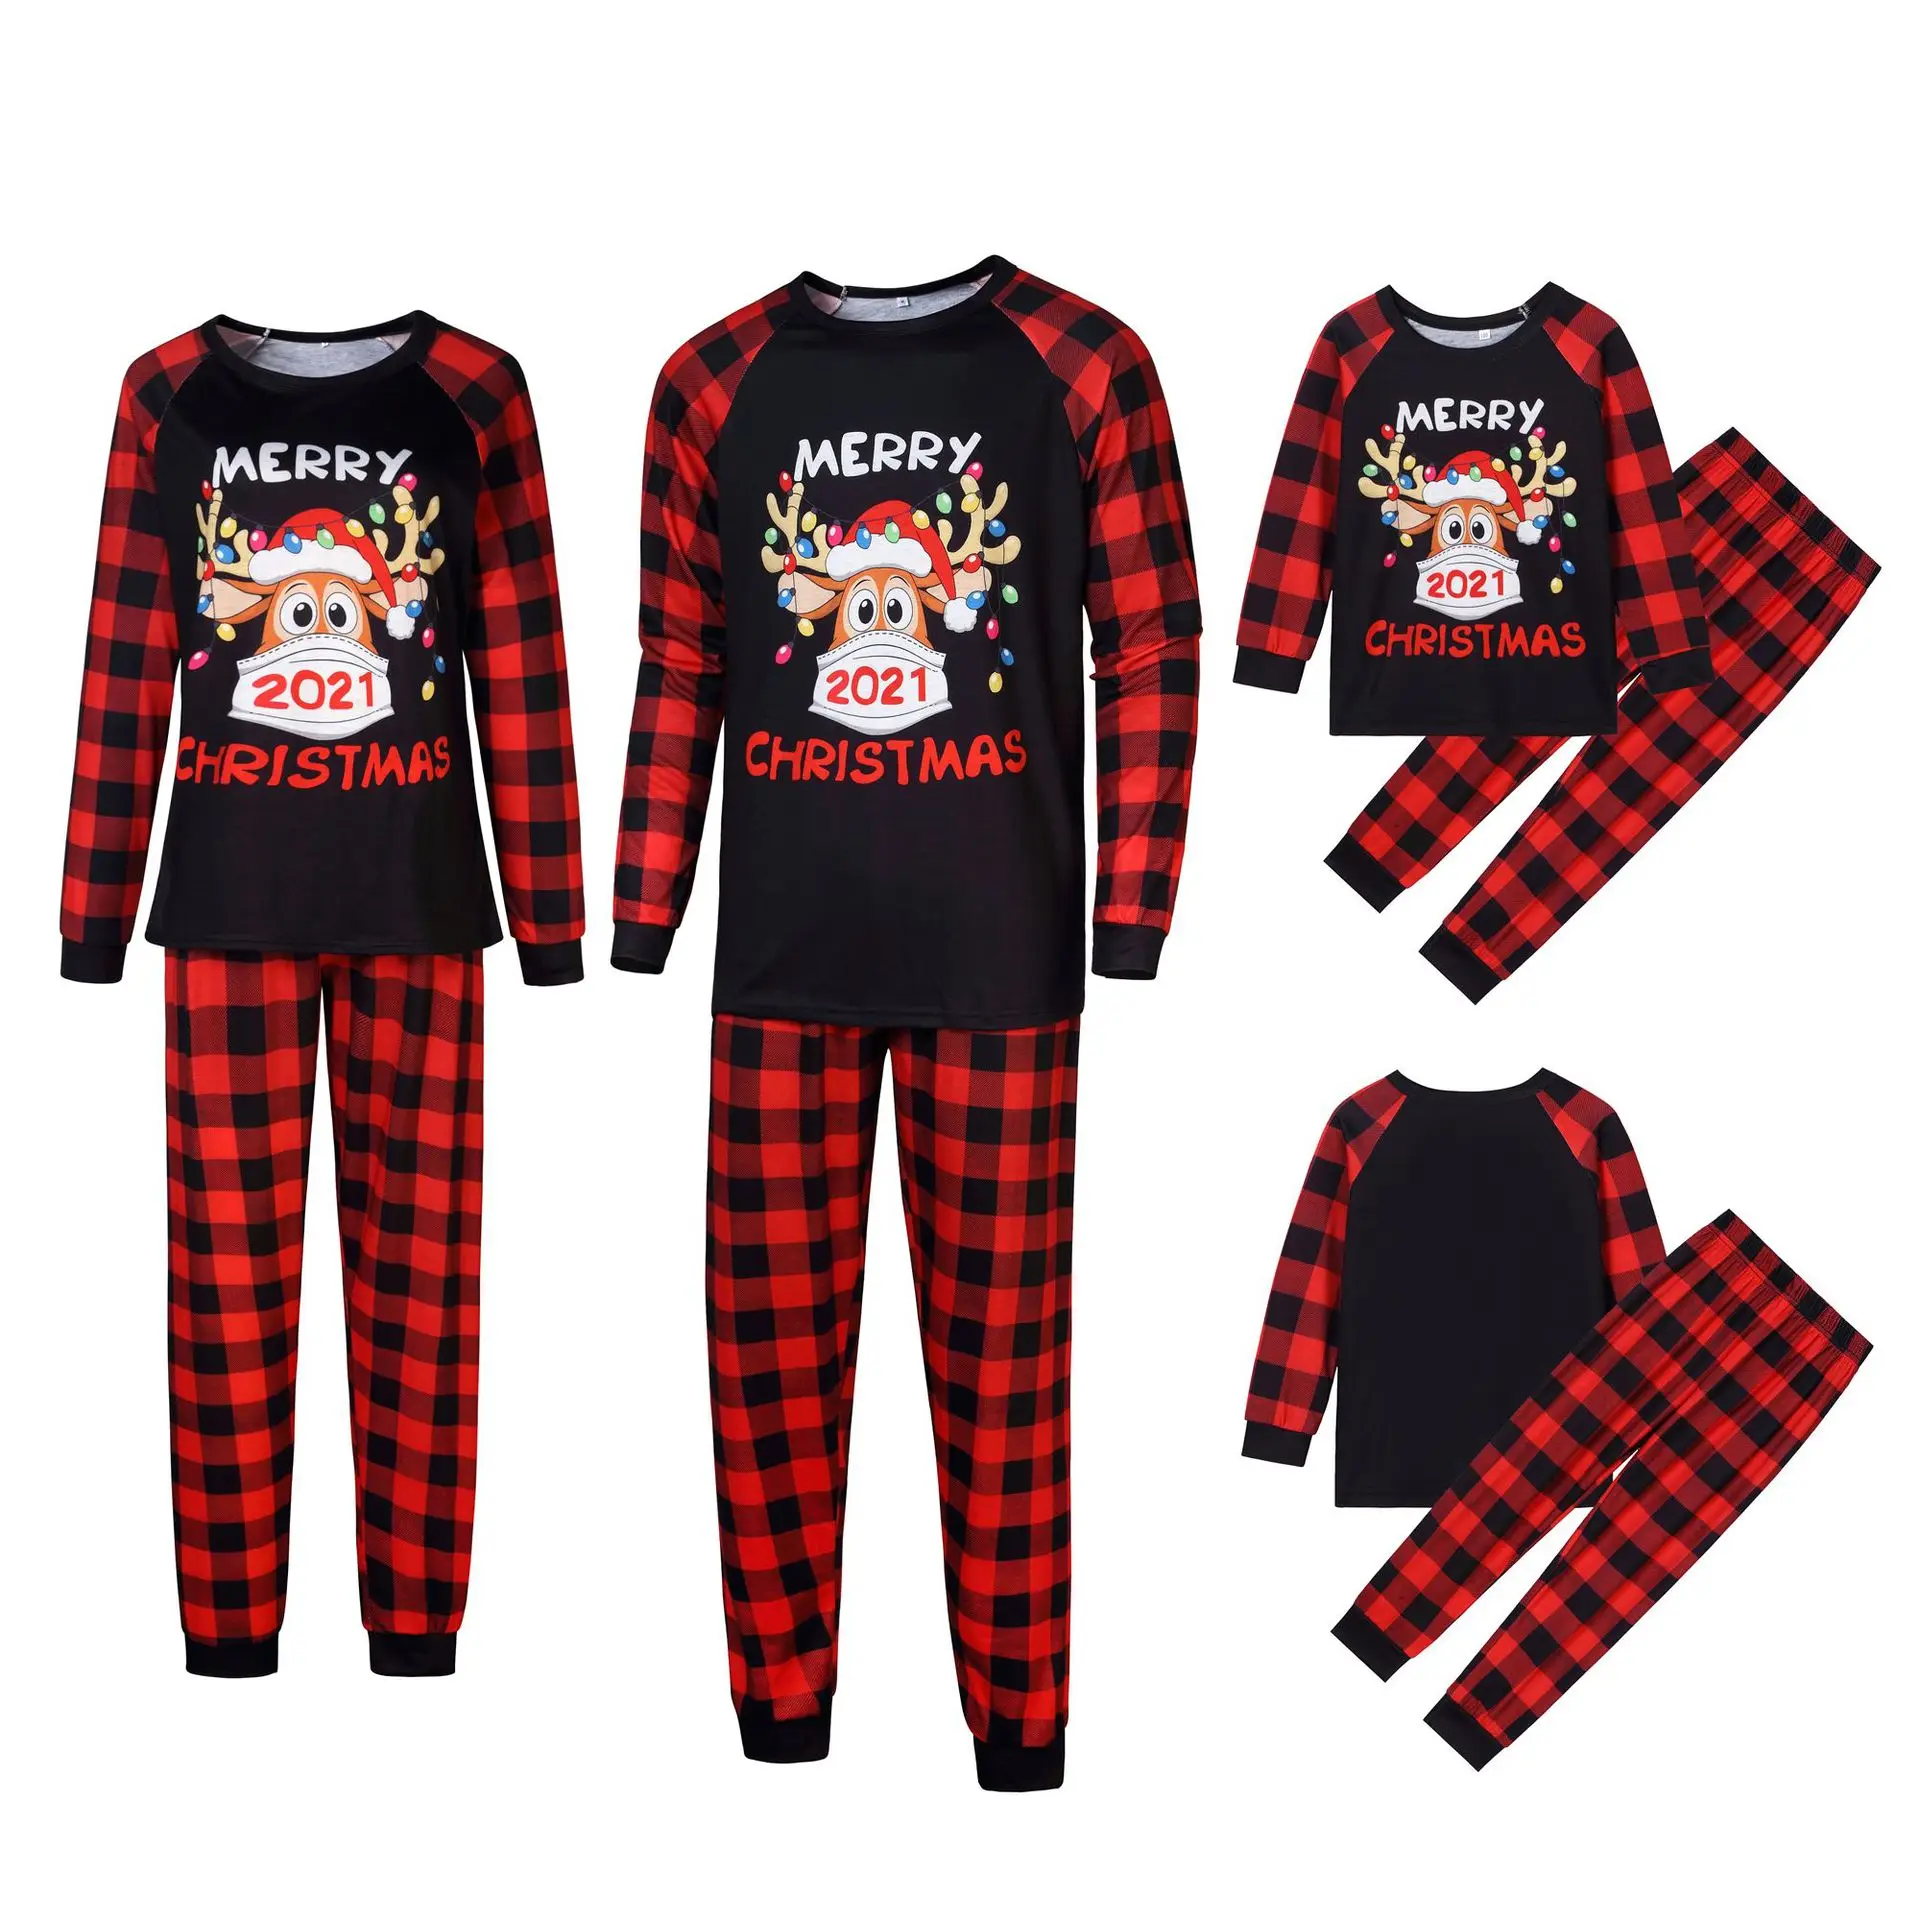 Christmas warm family pajamas home wear happy holiday two pieces parent children sleeping wear long sleeve cotton Christmas, As picture shown , custom more colors